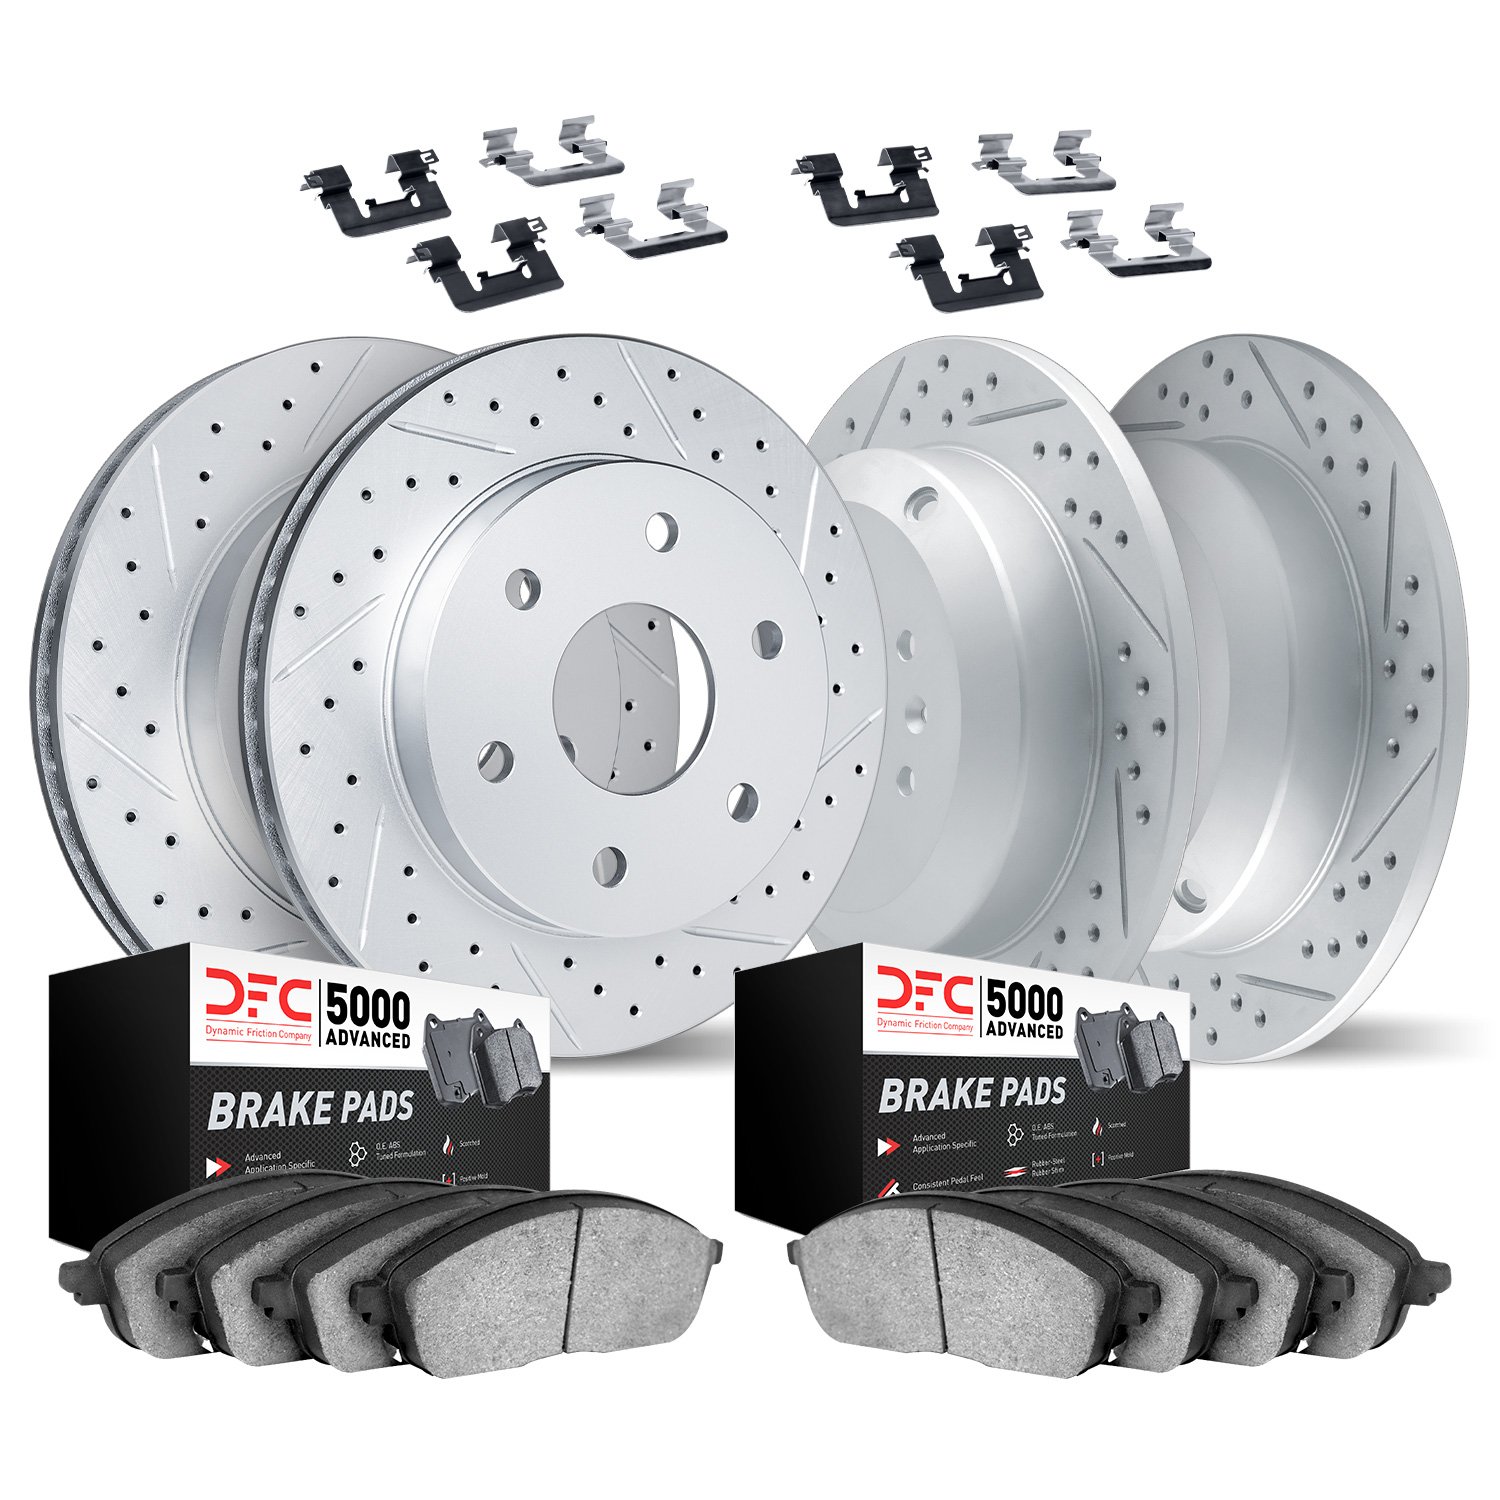 2514-52007 Geoperformance Drilled/Slotted Rotors w/5000 Advanced Brake Pads Kit & Hardware, 2006-2009 GM, Position: Front and Re